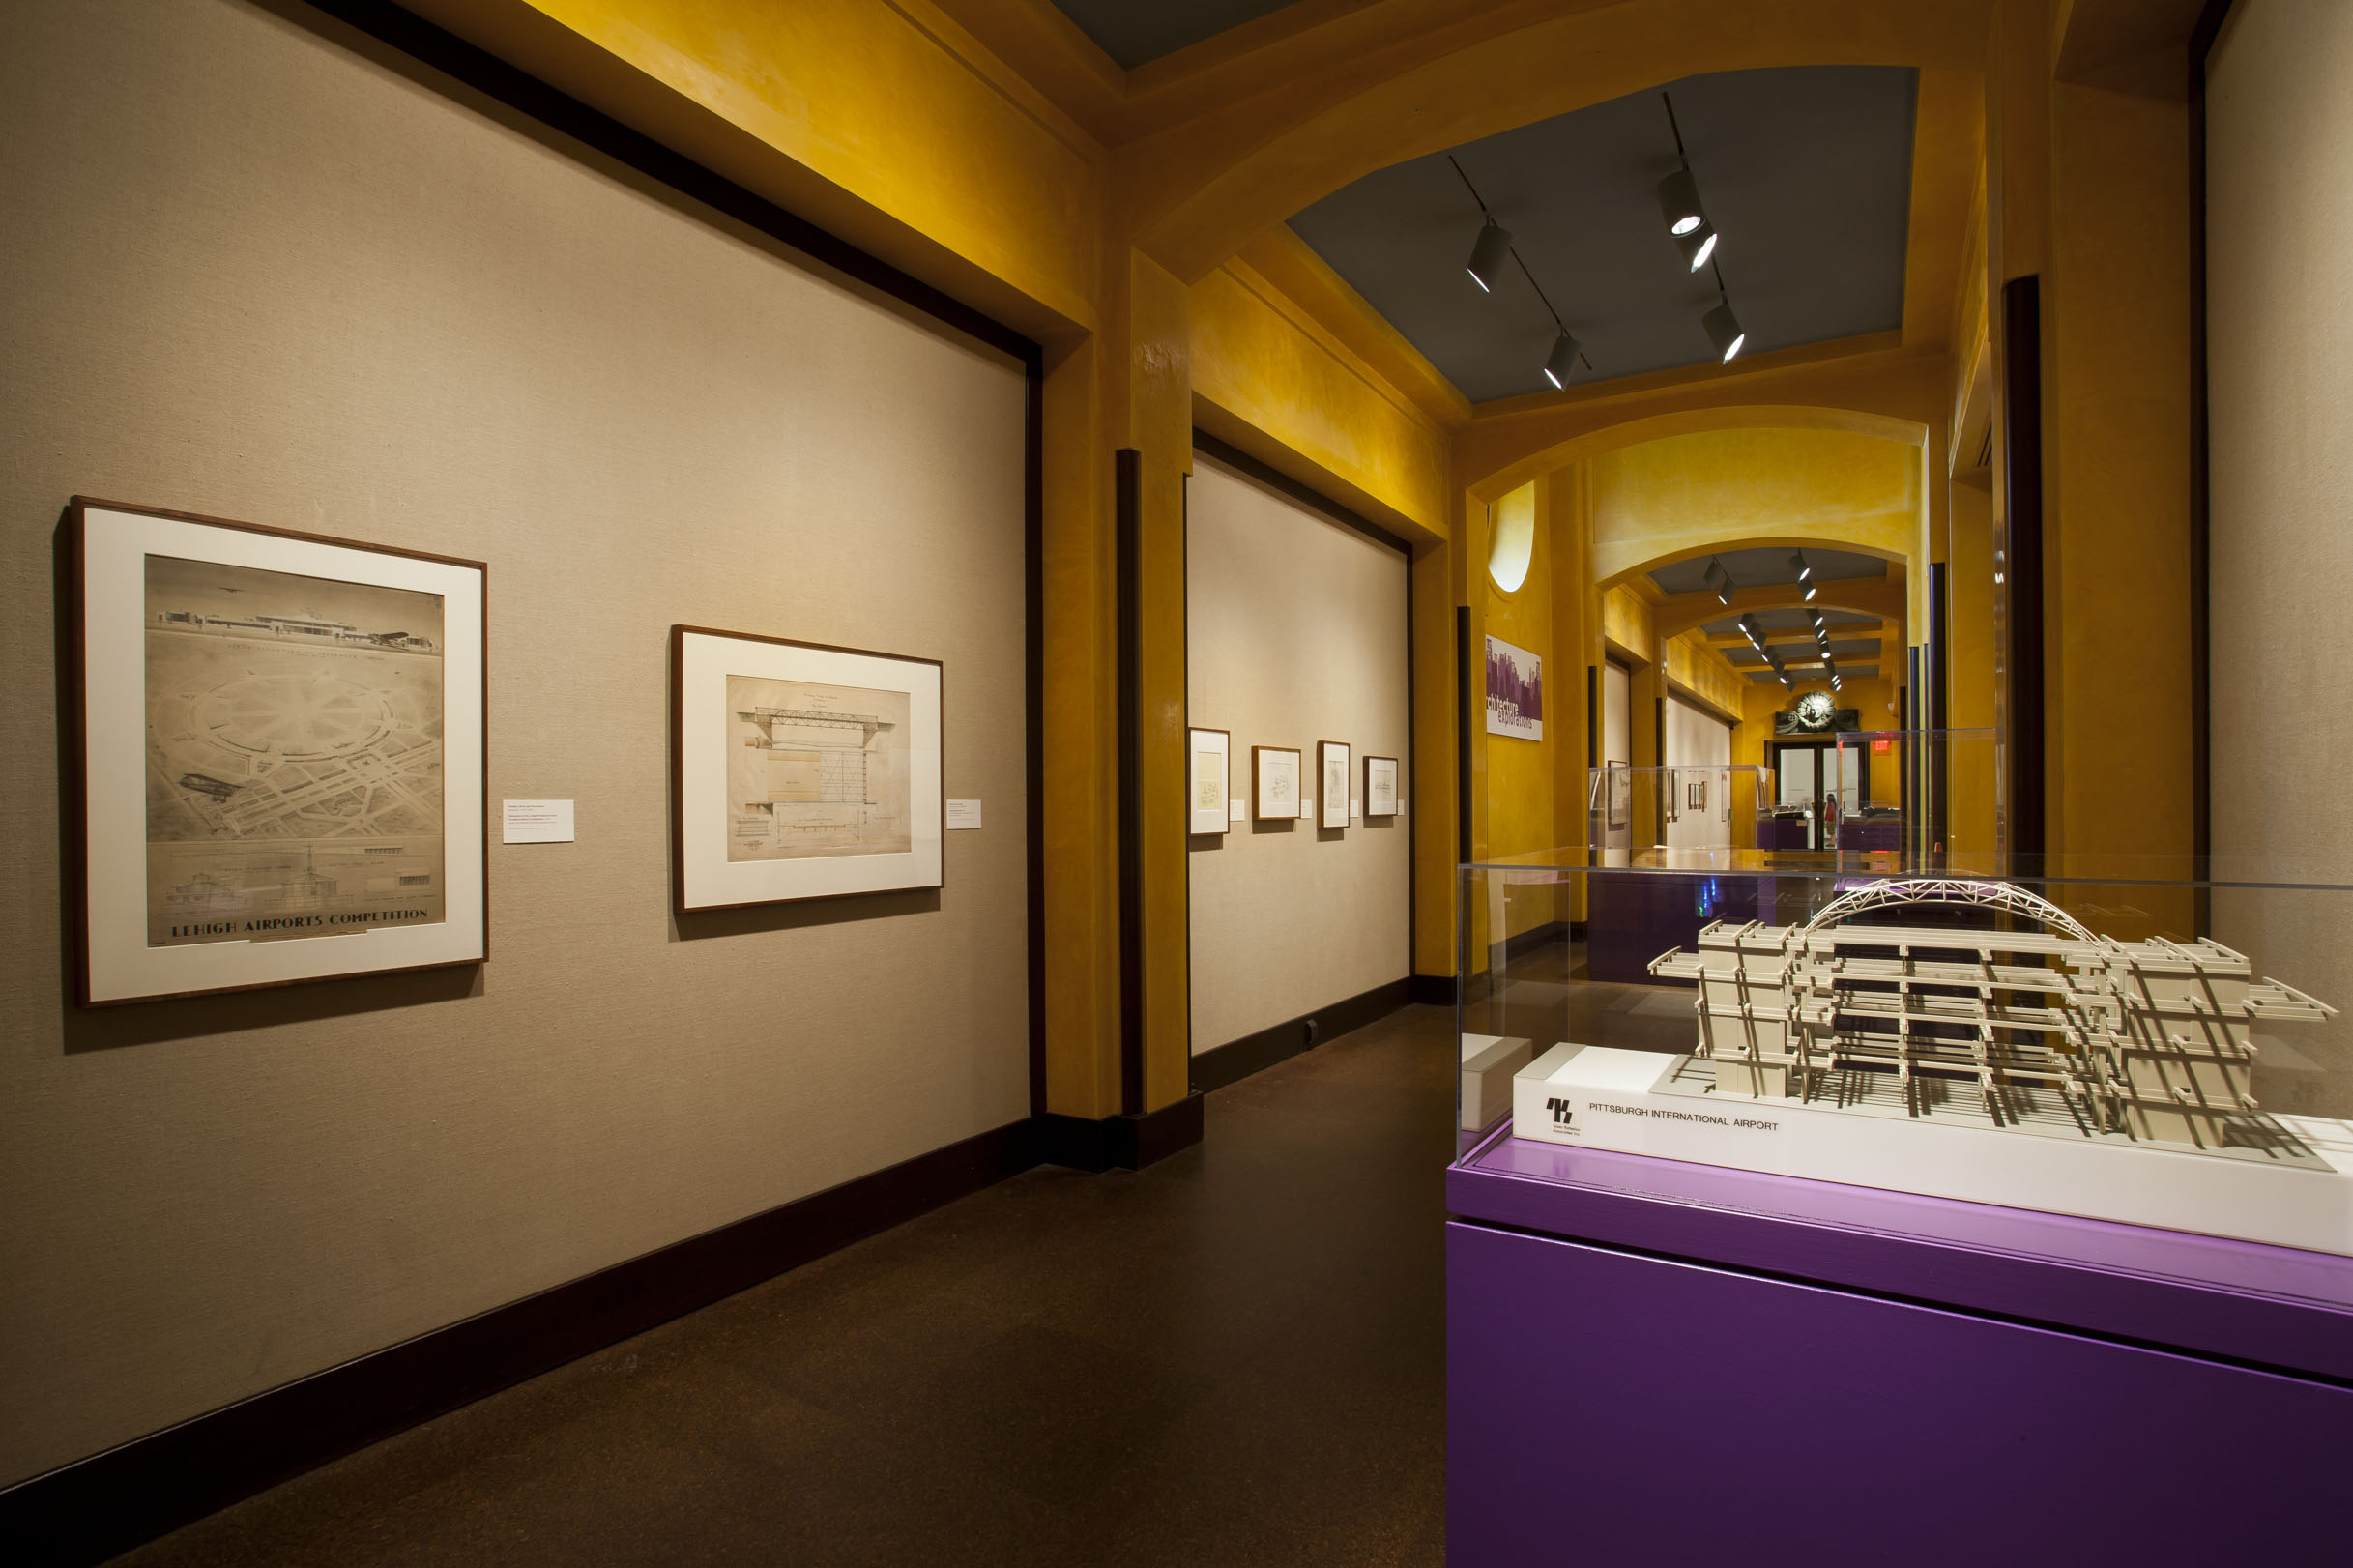 Installation view of Architecture Explorations Exhibition